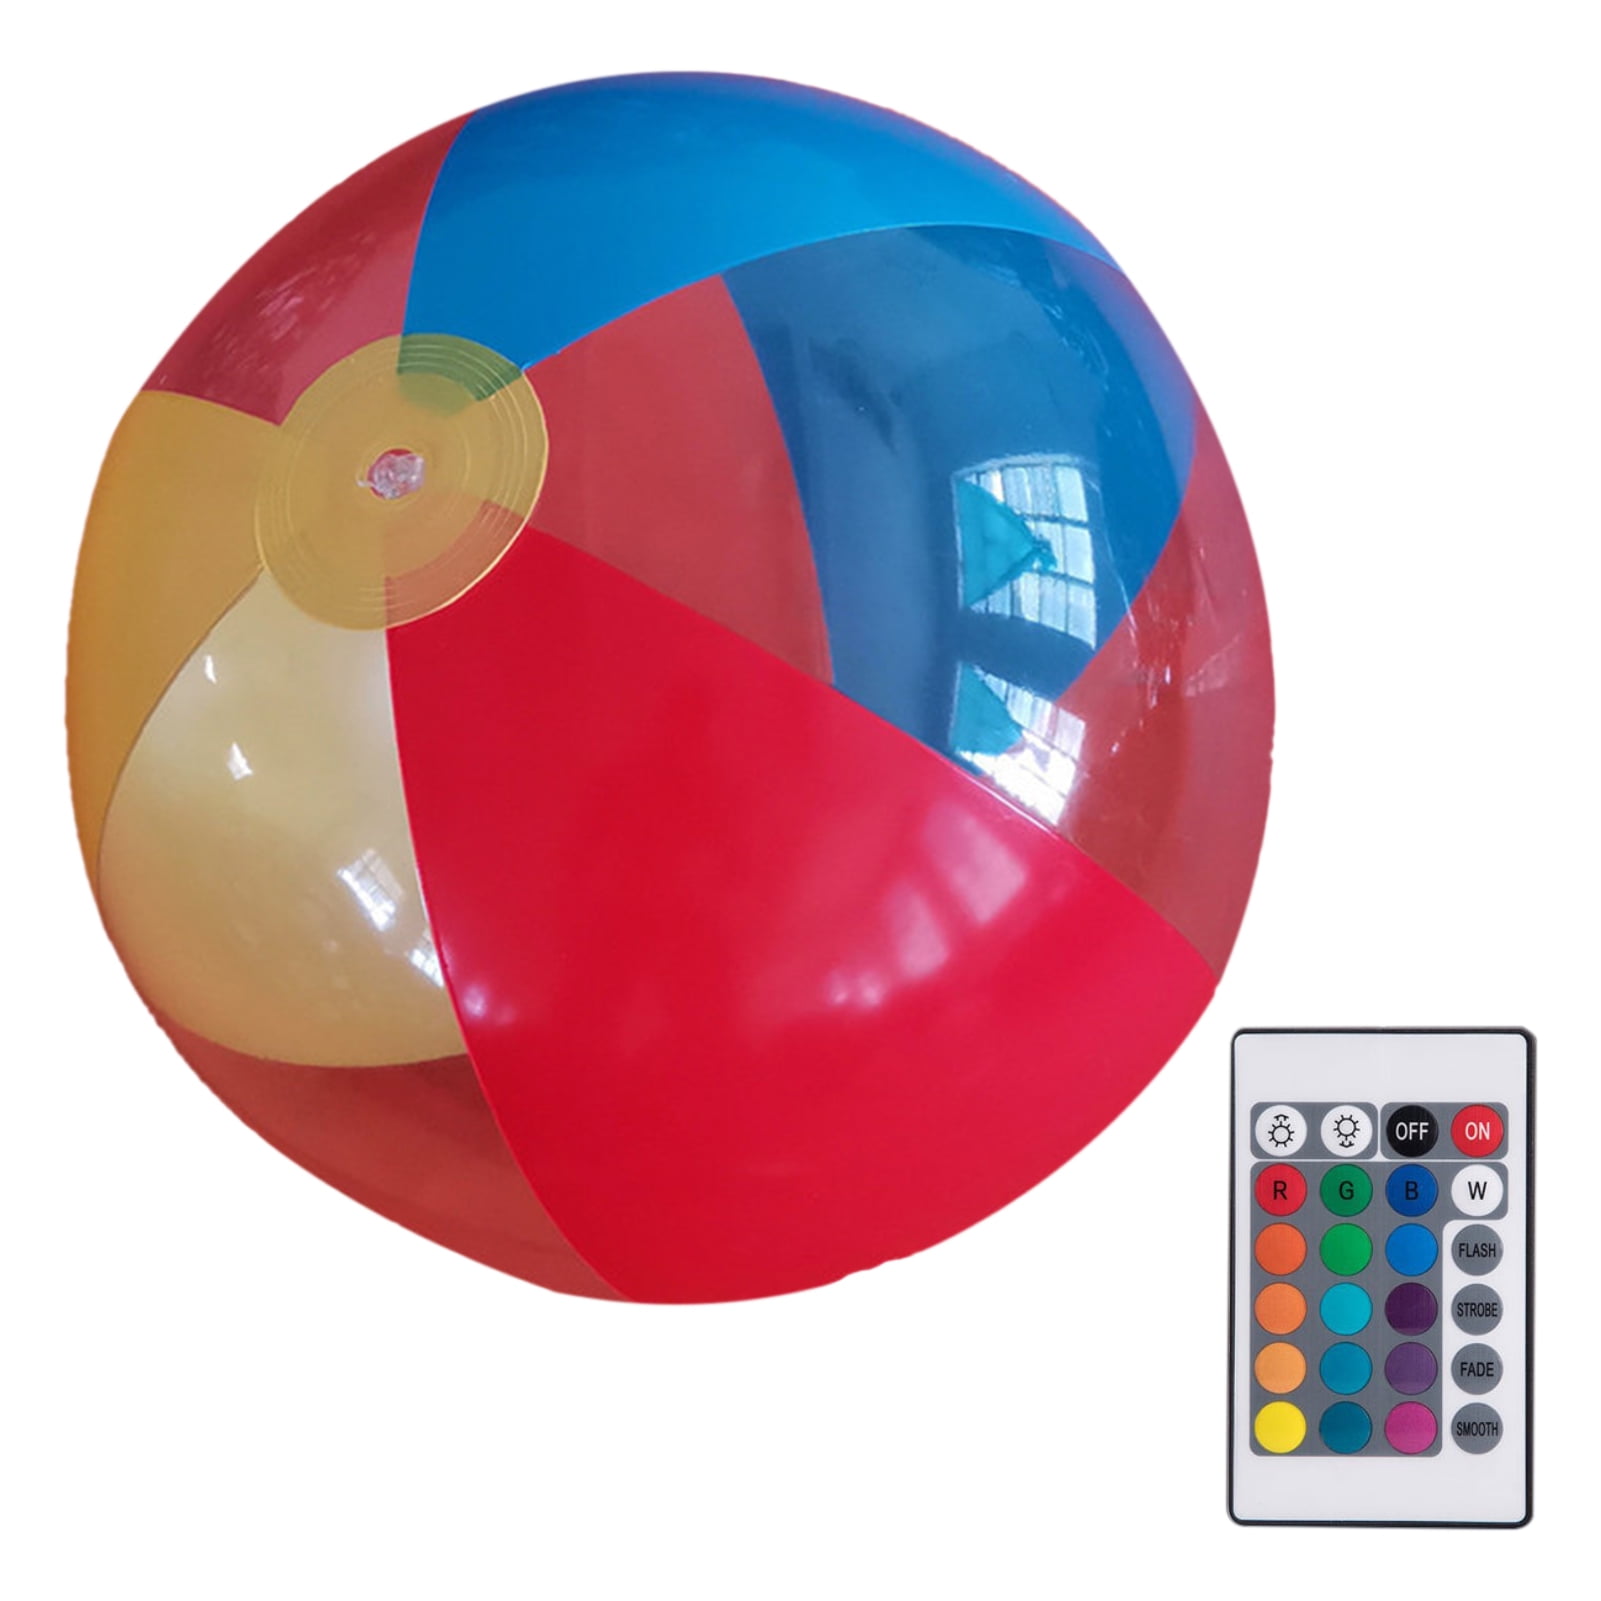 Rimpels Duplicaat compact Opolski Beach Ball Toy Lighting Waterproof Remote Controlled Kids Inflated  Beach Ball Toy for Entertainment - Walmart.com